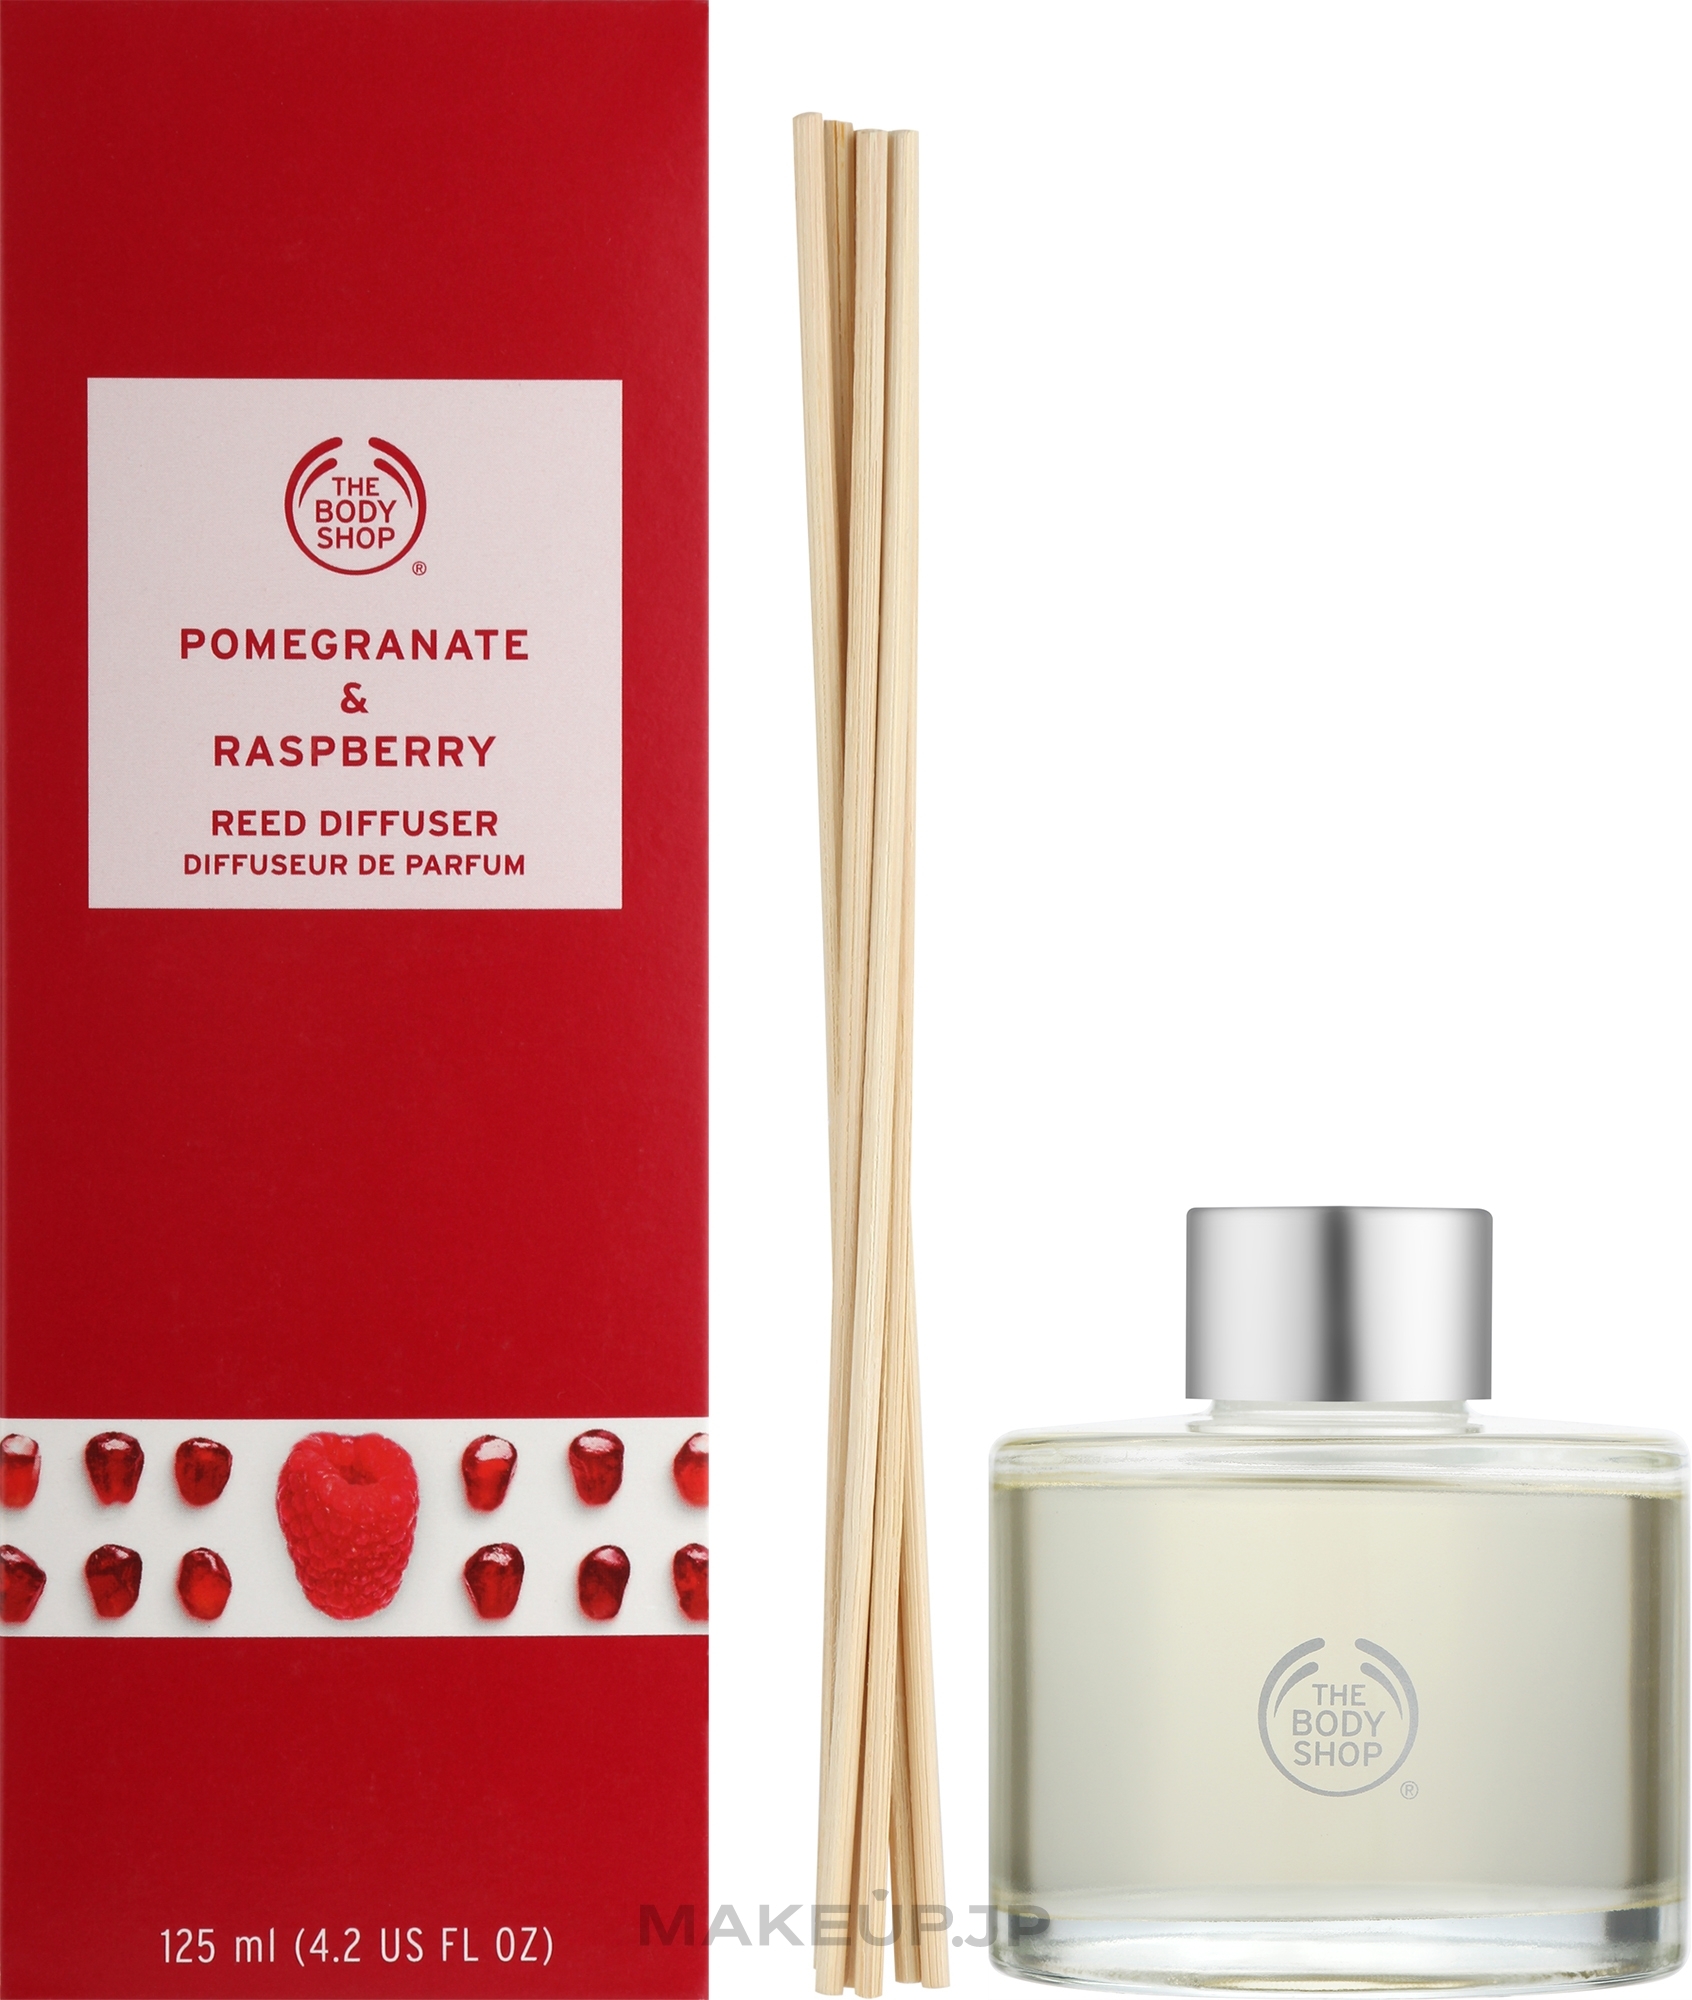 Pomegranate & Raspberry Reed Diffuser - The Body Shop Pomegranate & Raspberry Reed Diffuser — photo 125 ml